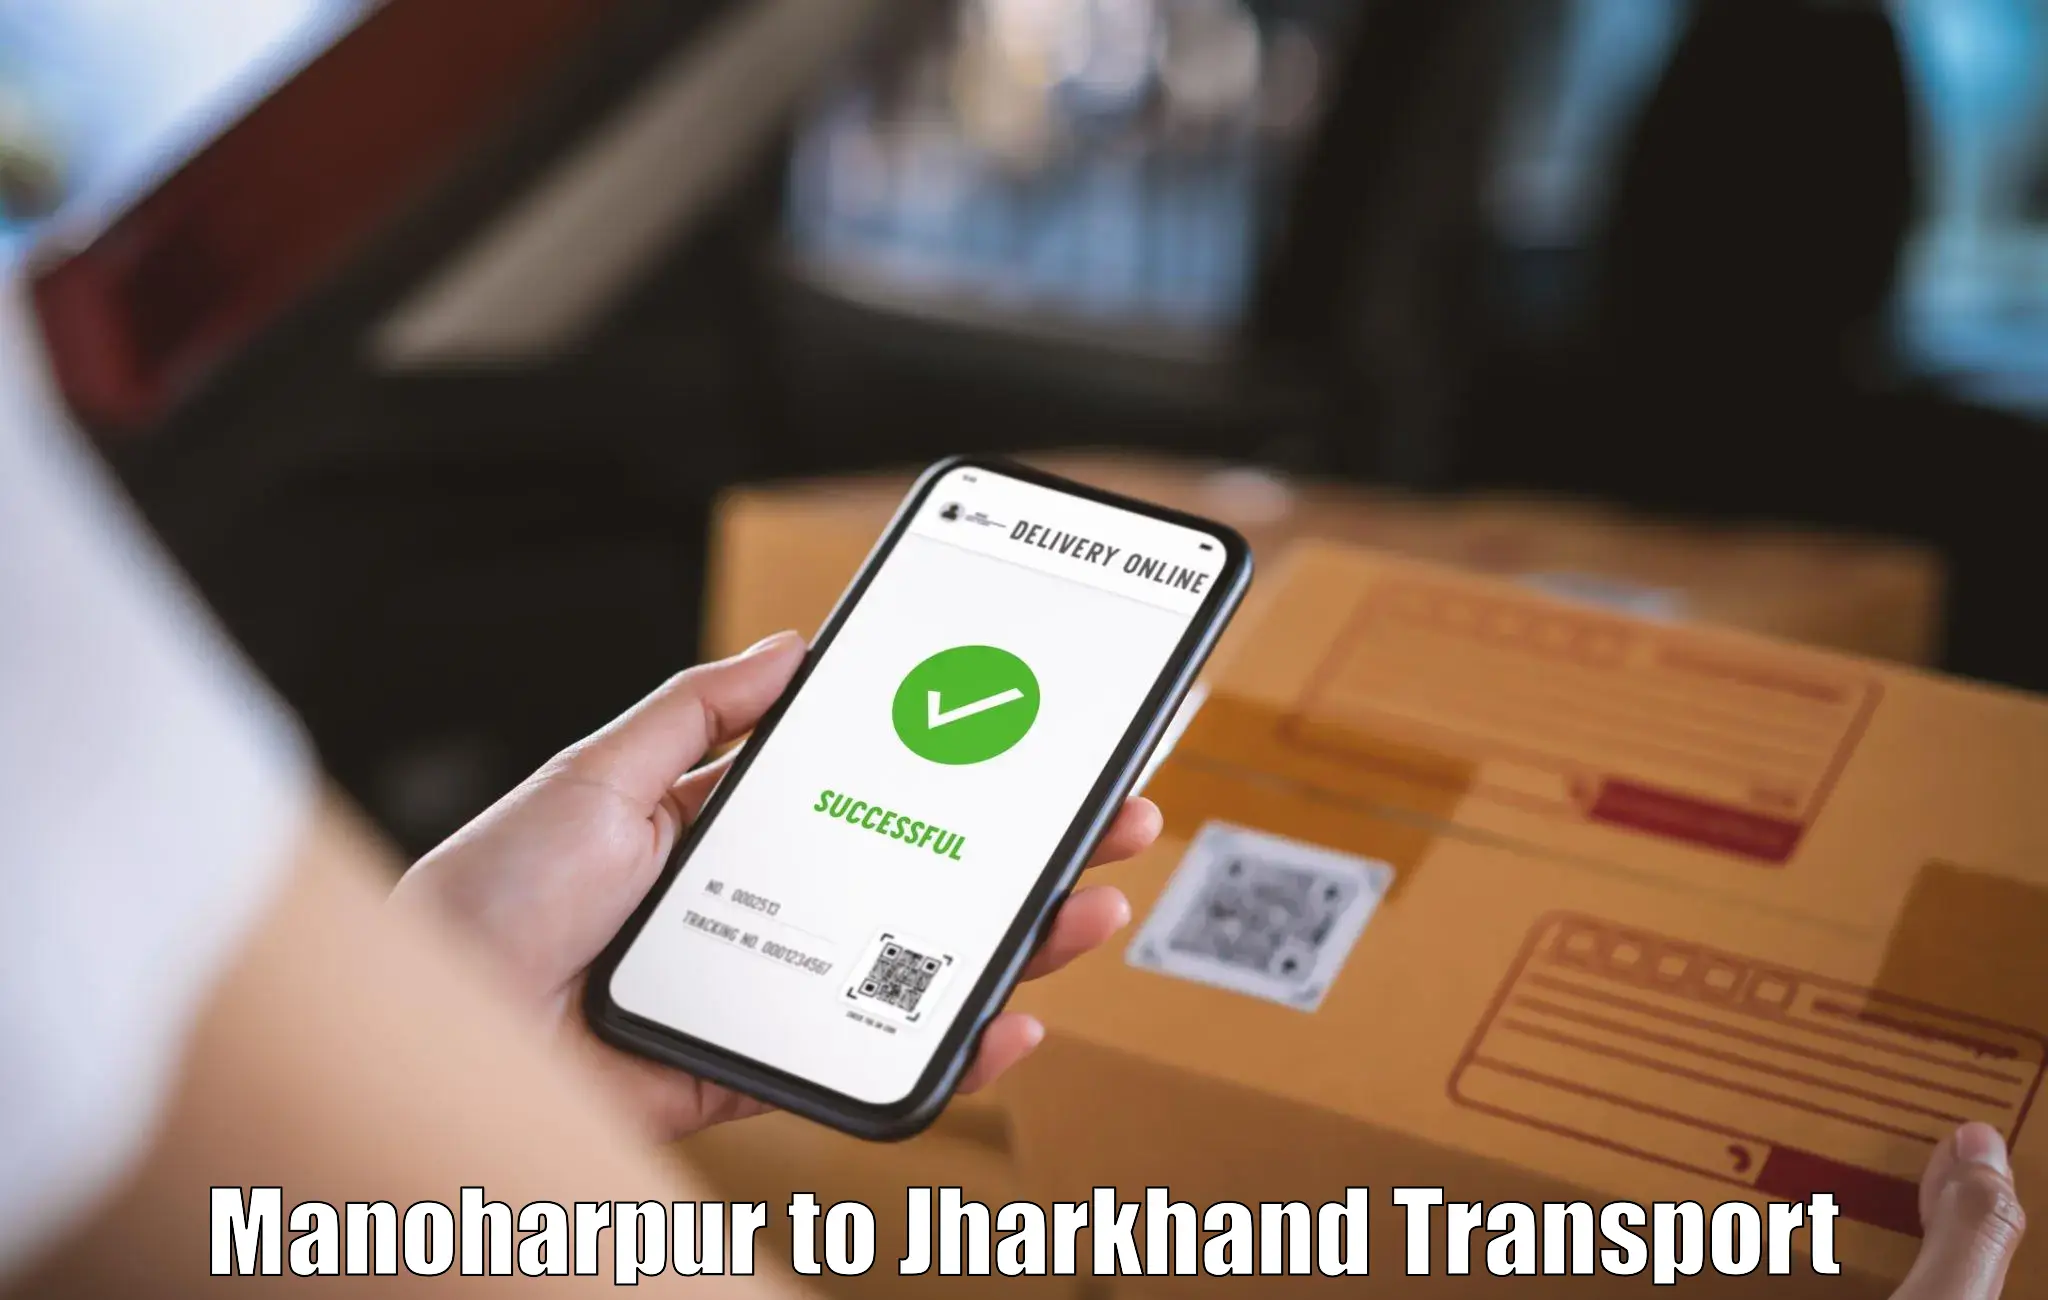 Commercial transport service Manoharpur to Boarijore